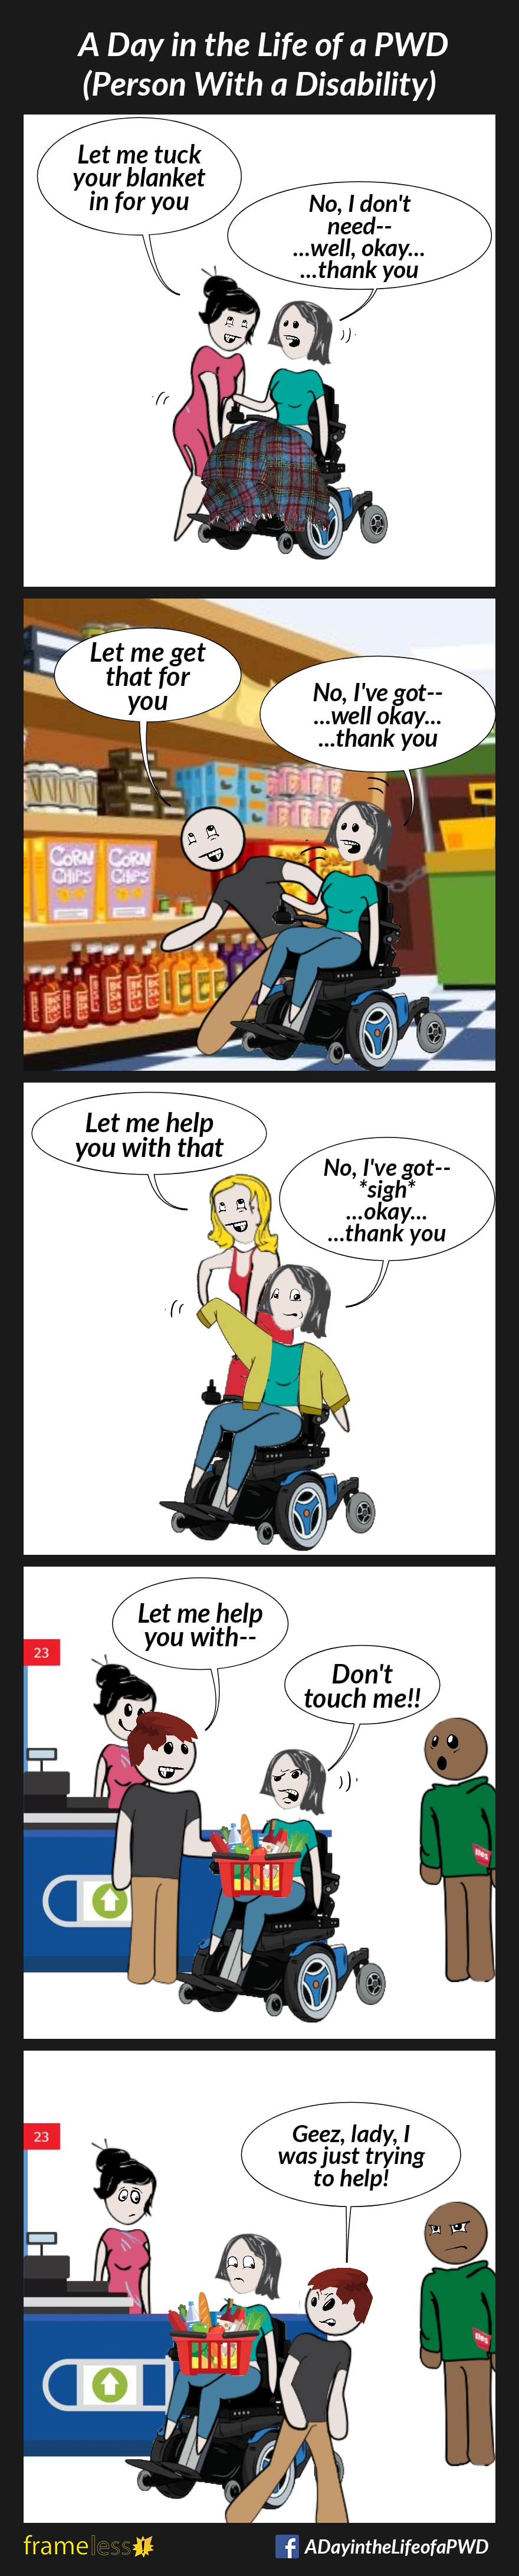 COMIC STRIP 
A Day in the Life of a PWD (Person With a Disability) 

Frame 1:
A woman in a power wheelchair has a blanket on her lap. A stranger suddenly starts tucking it in.
STRANGER: Let me tuck your blanket in for you
WOMAN: No, I don't need--
...well, okay...
...thank you

Frame 2:
The woman is in a grocery store aisle reaching for an item on a low shelf. A stranger suddenly leans past her to reach for the item, jostling her.
STRANGER: Let me get that for you
WOMAN: No, I've got--
...well, okay...
...thank you

Frame 3:
The woman is putting on her jacket. A stranger suddenly grabs it to help her.
STRANGER: Let me help you with that
WOMAN: No, I've got--
*sigh*
...well, okay...
...thank you

Frame 4:
The woman is at a check out with a full basket of groceries in her lap. A stranger suddenly reaches for her basket.
STRANGER: Let me help you with--
WOMAN: Don't touch me!!!

Frame 5:
The stranger walks away angrily.
STRANGER: Geez, lady, I was just trying to help!